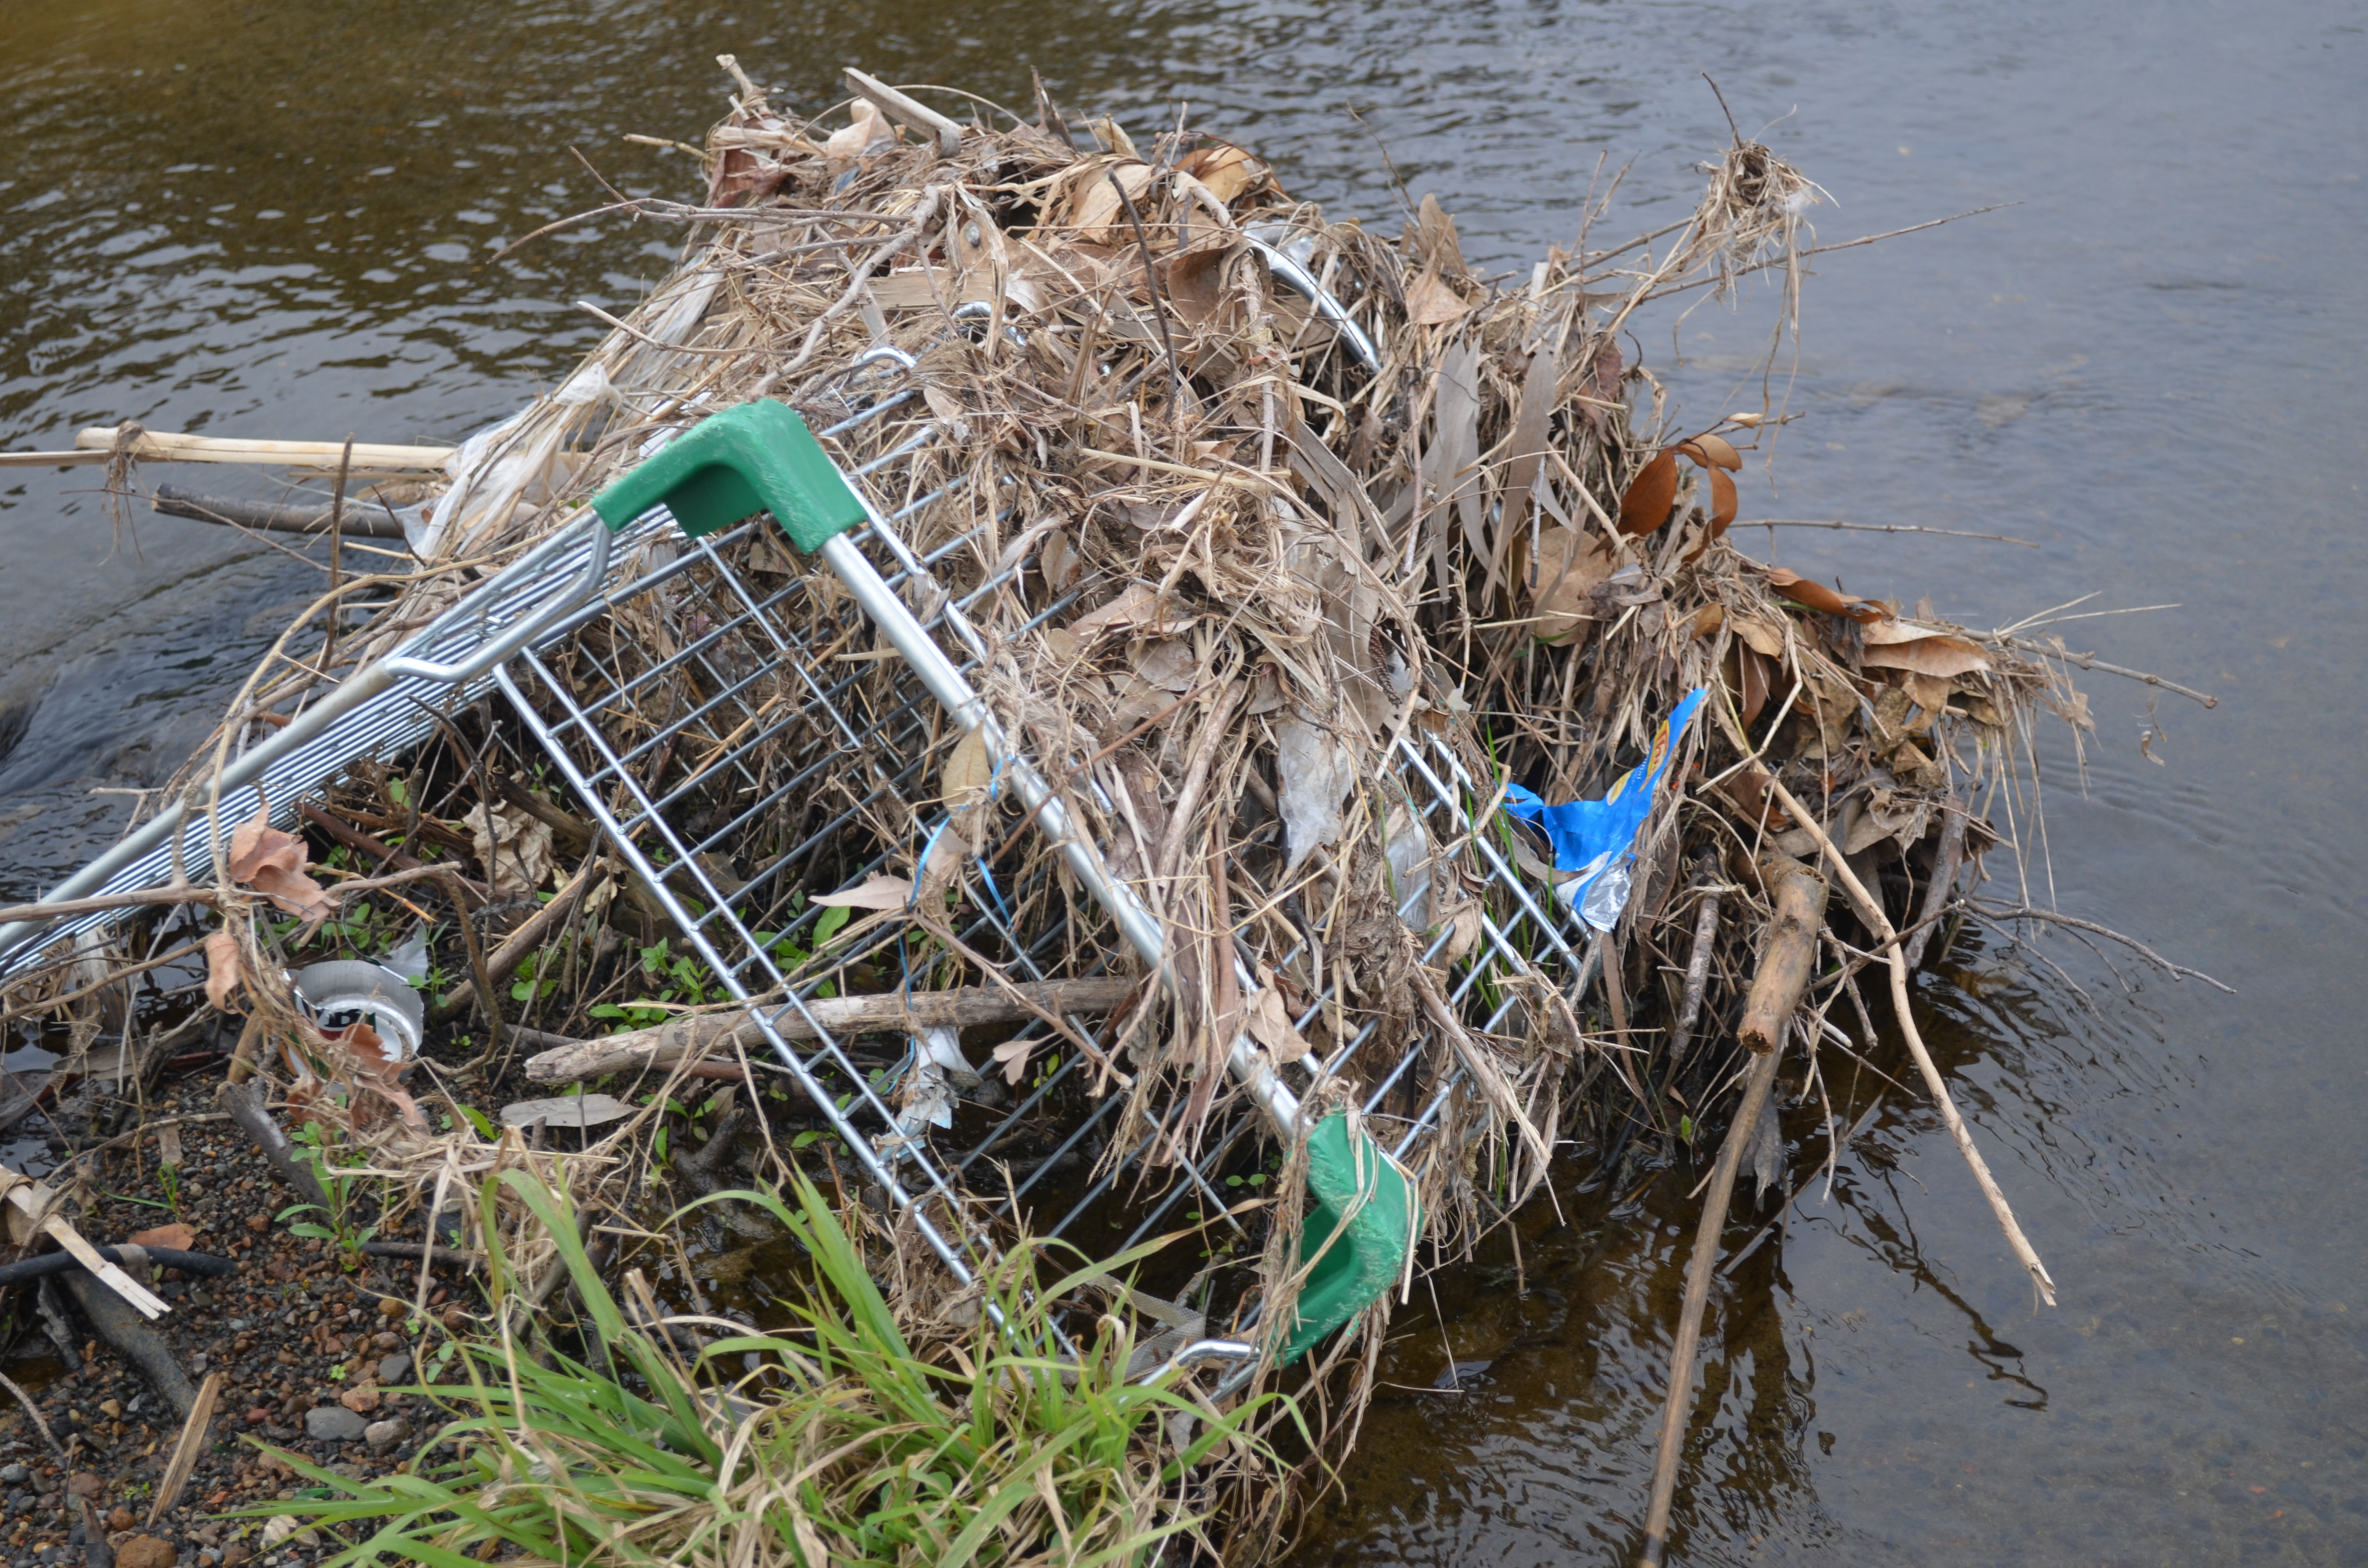 A shopping trolley filled with plant material sits abandoned in a lake